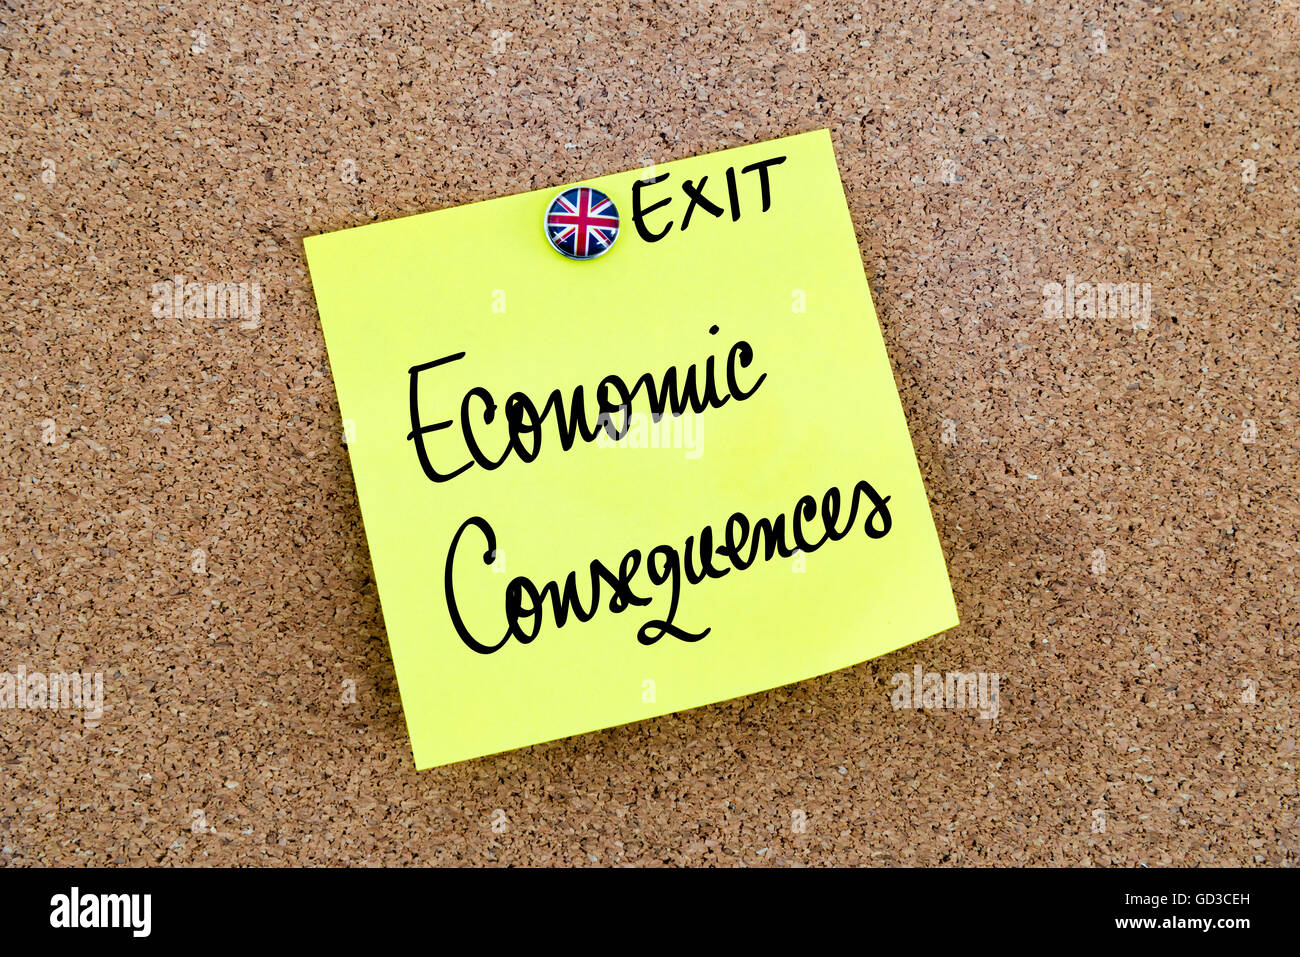 Yellow paper note pinned on cork board with Great Britain flag thumbtack, written text ECONOMIC CONSEQUENCES, United Kingdom exit from European Union Stock Photo